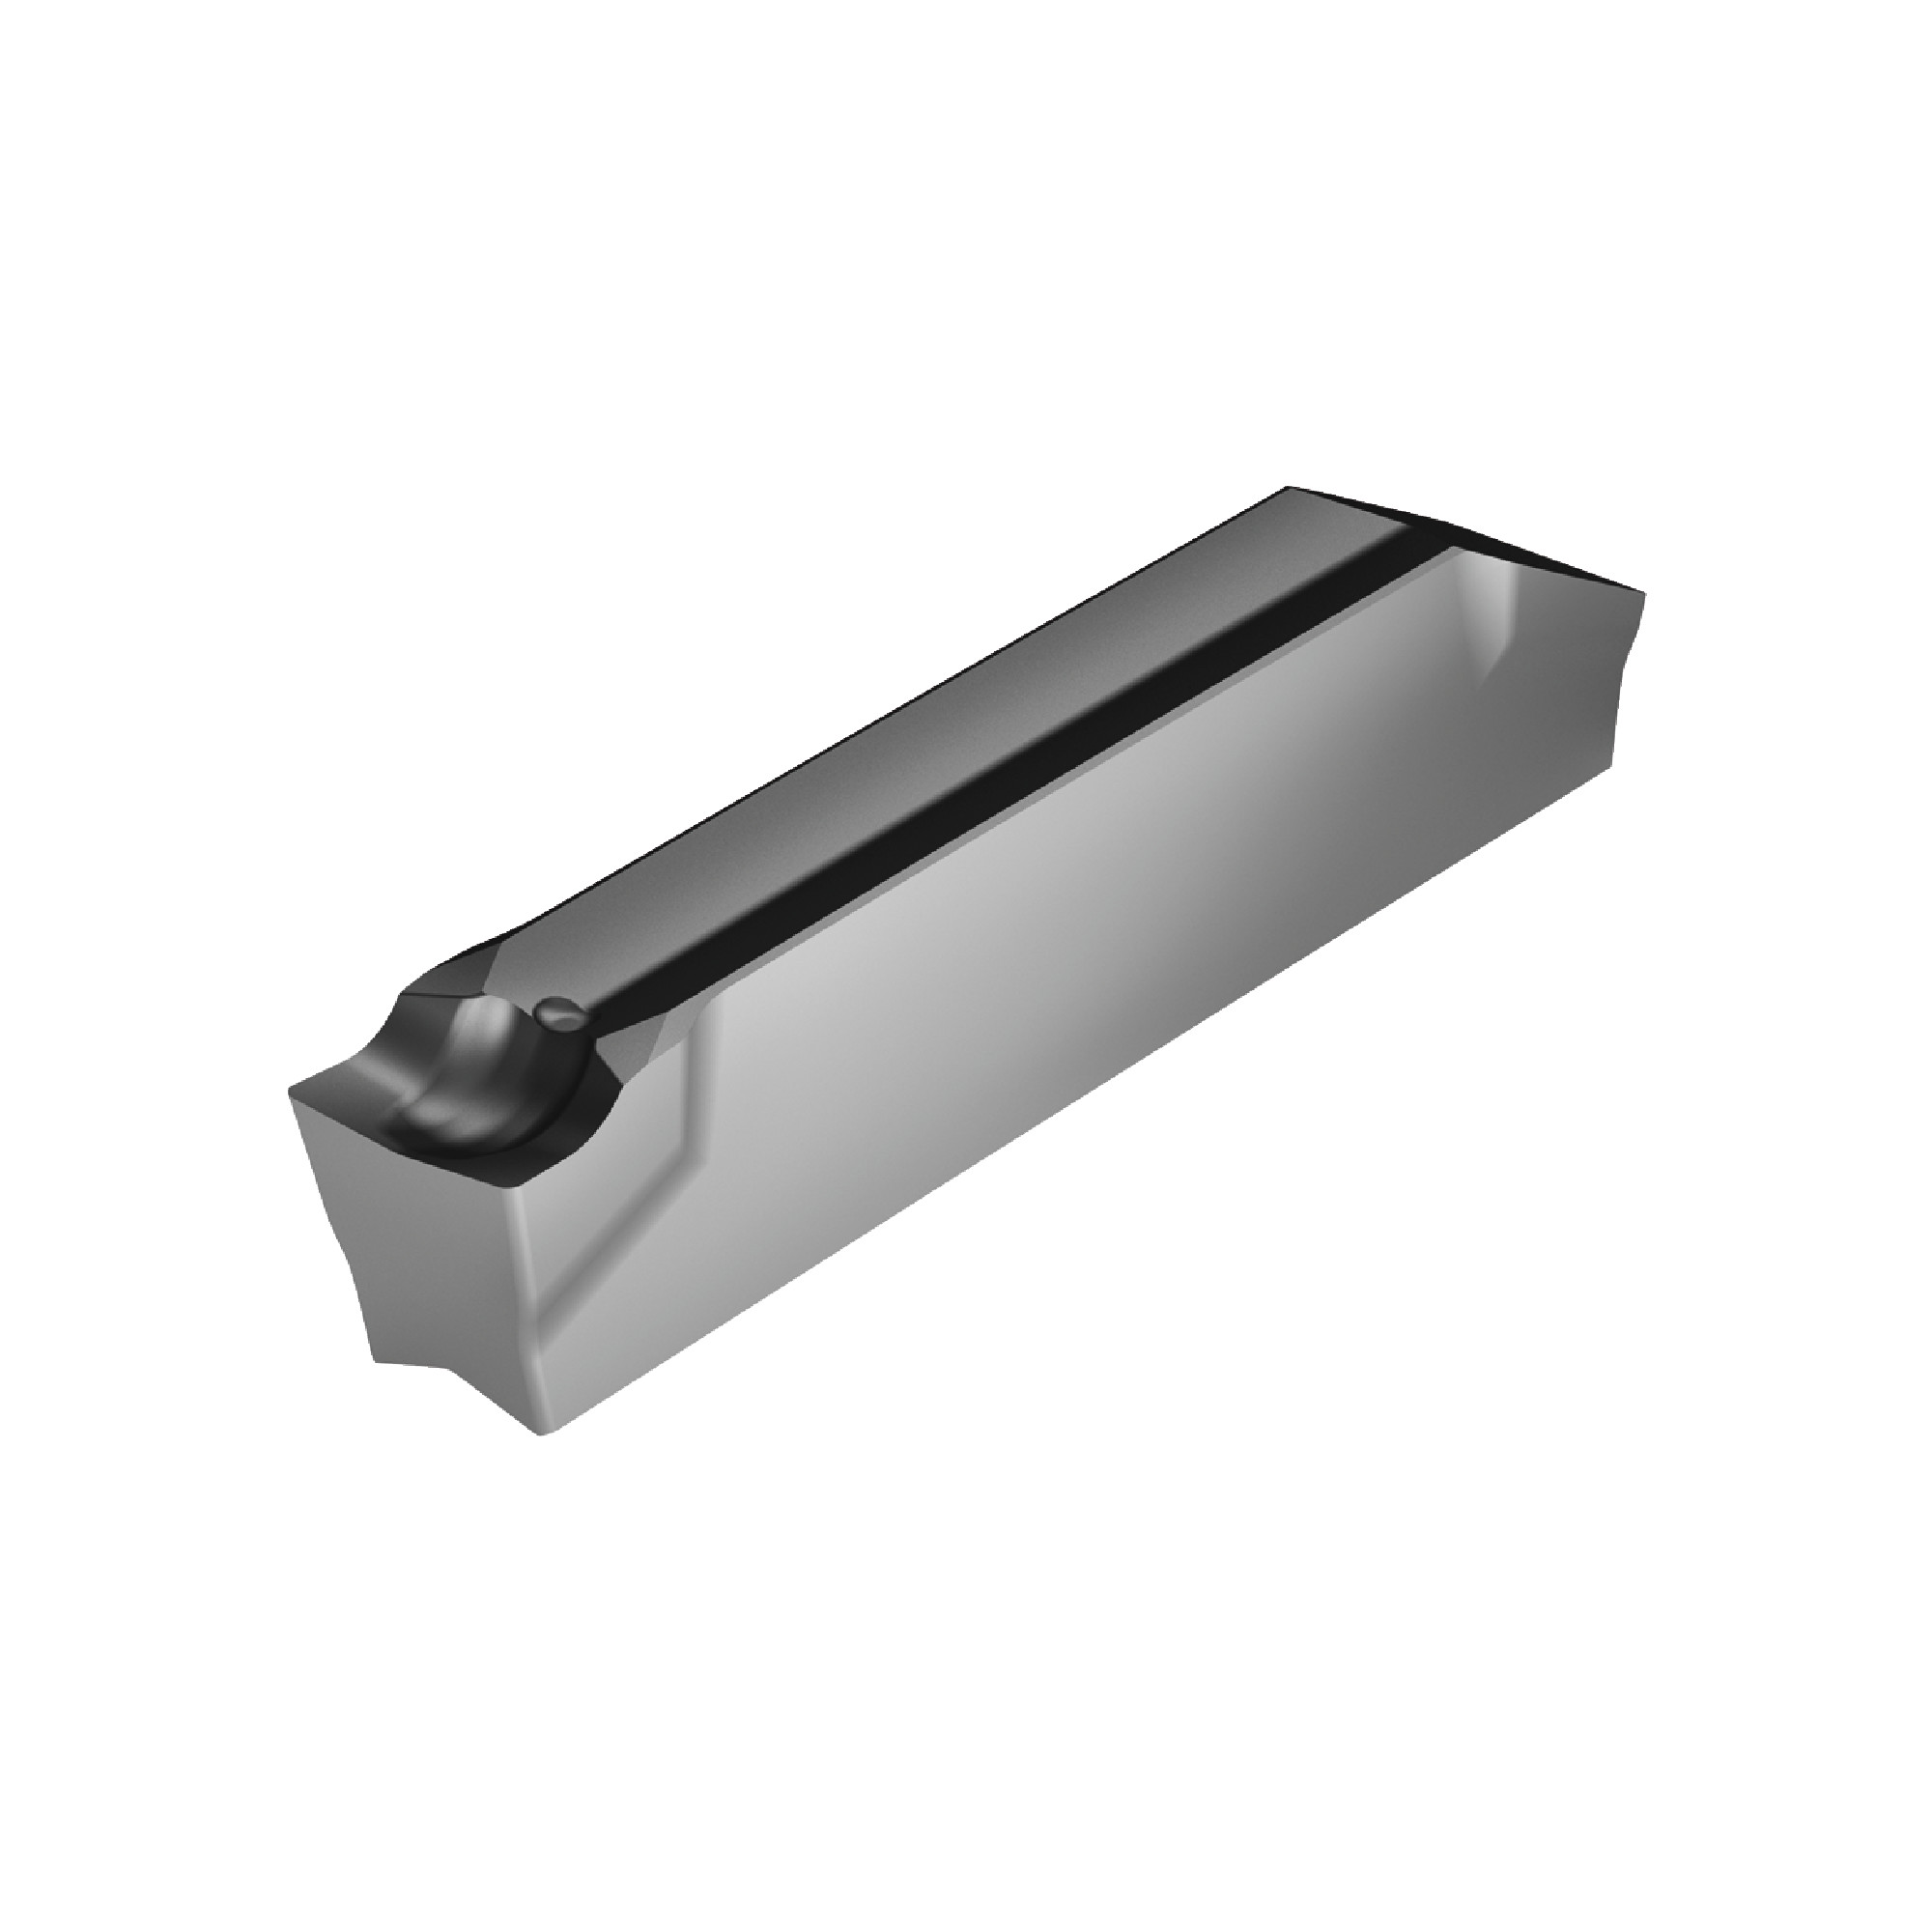 WALTER VALENITE - GX24-2E300N02-CF5 WSM43S / GX - GROOVING Indexable Carbide Insert / 0.118" Cutting Width